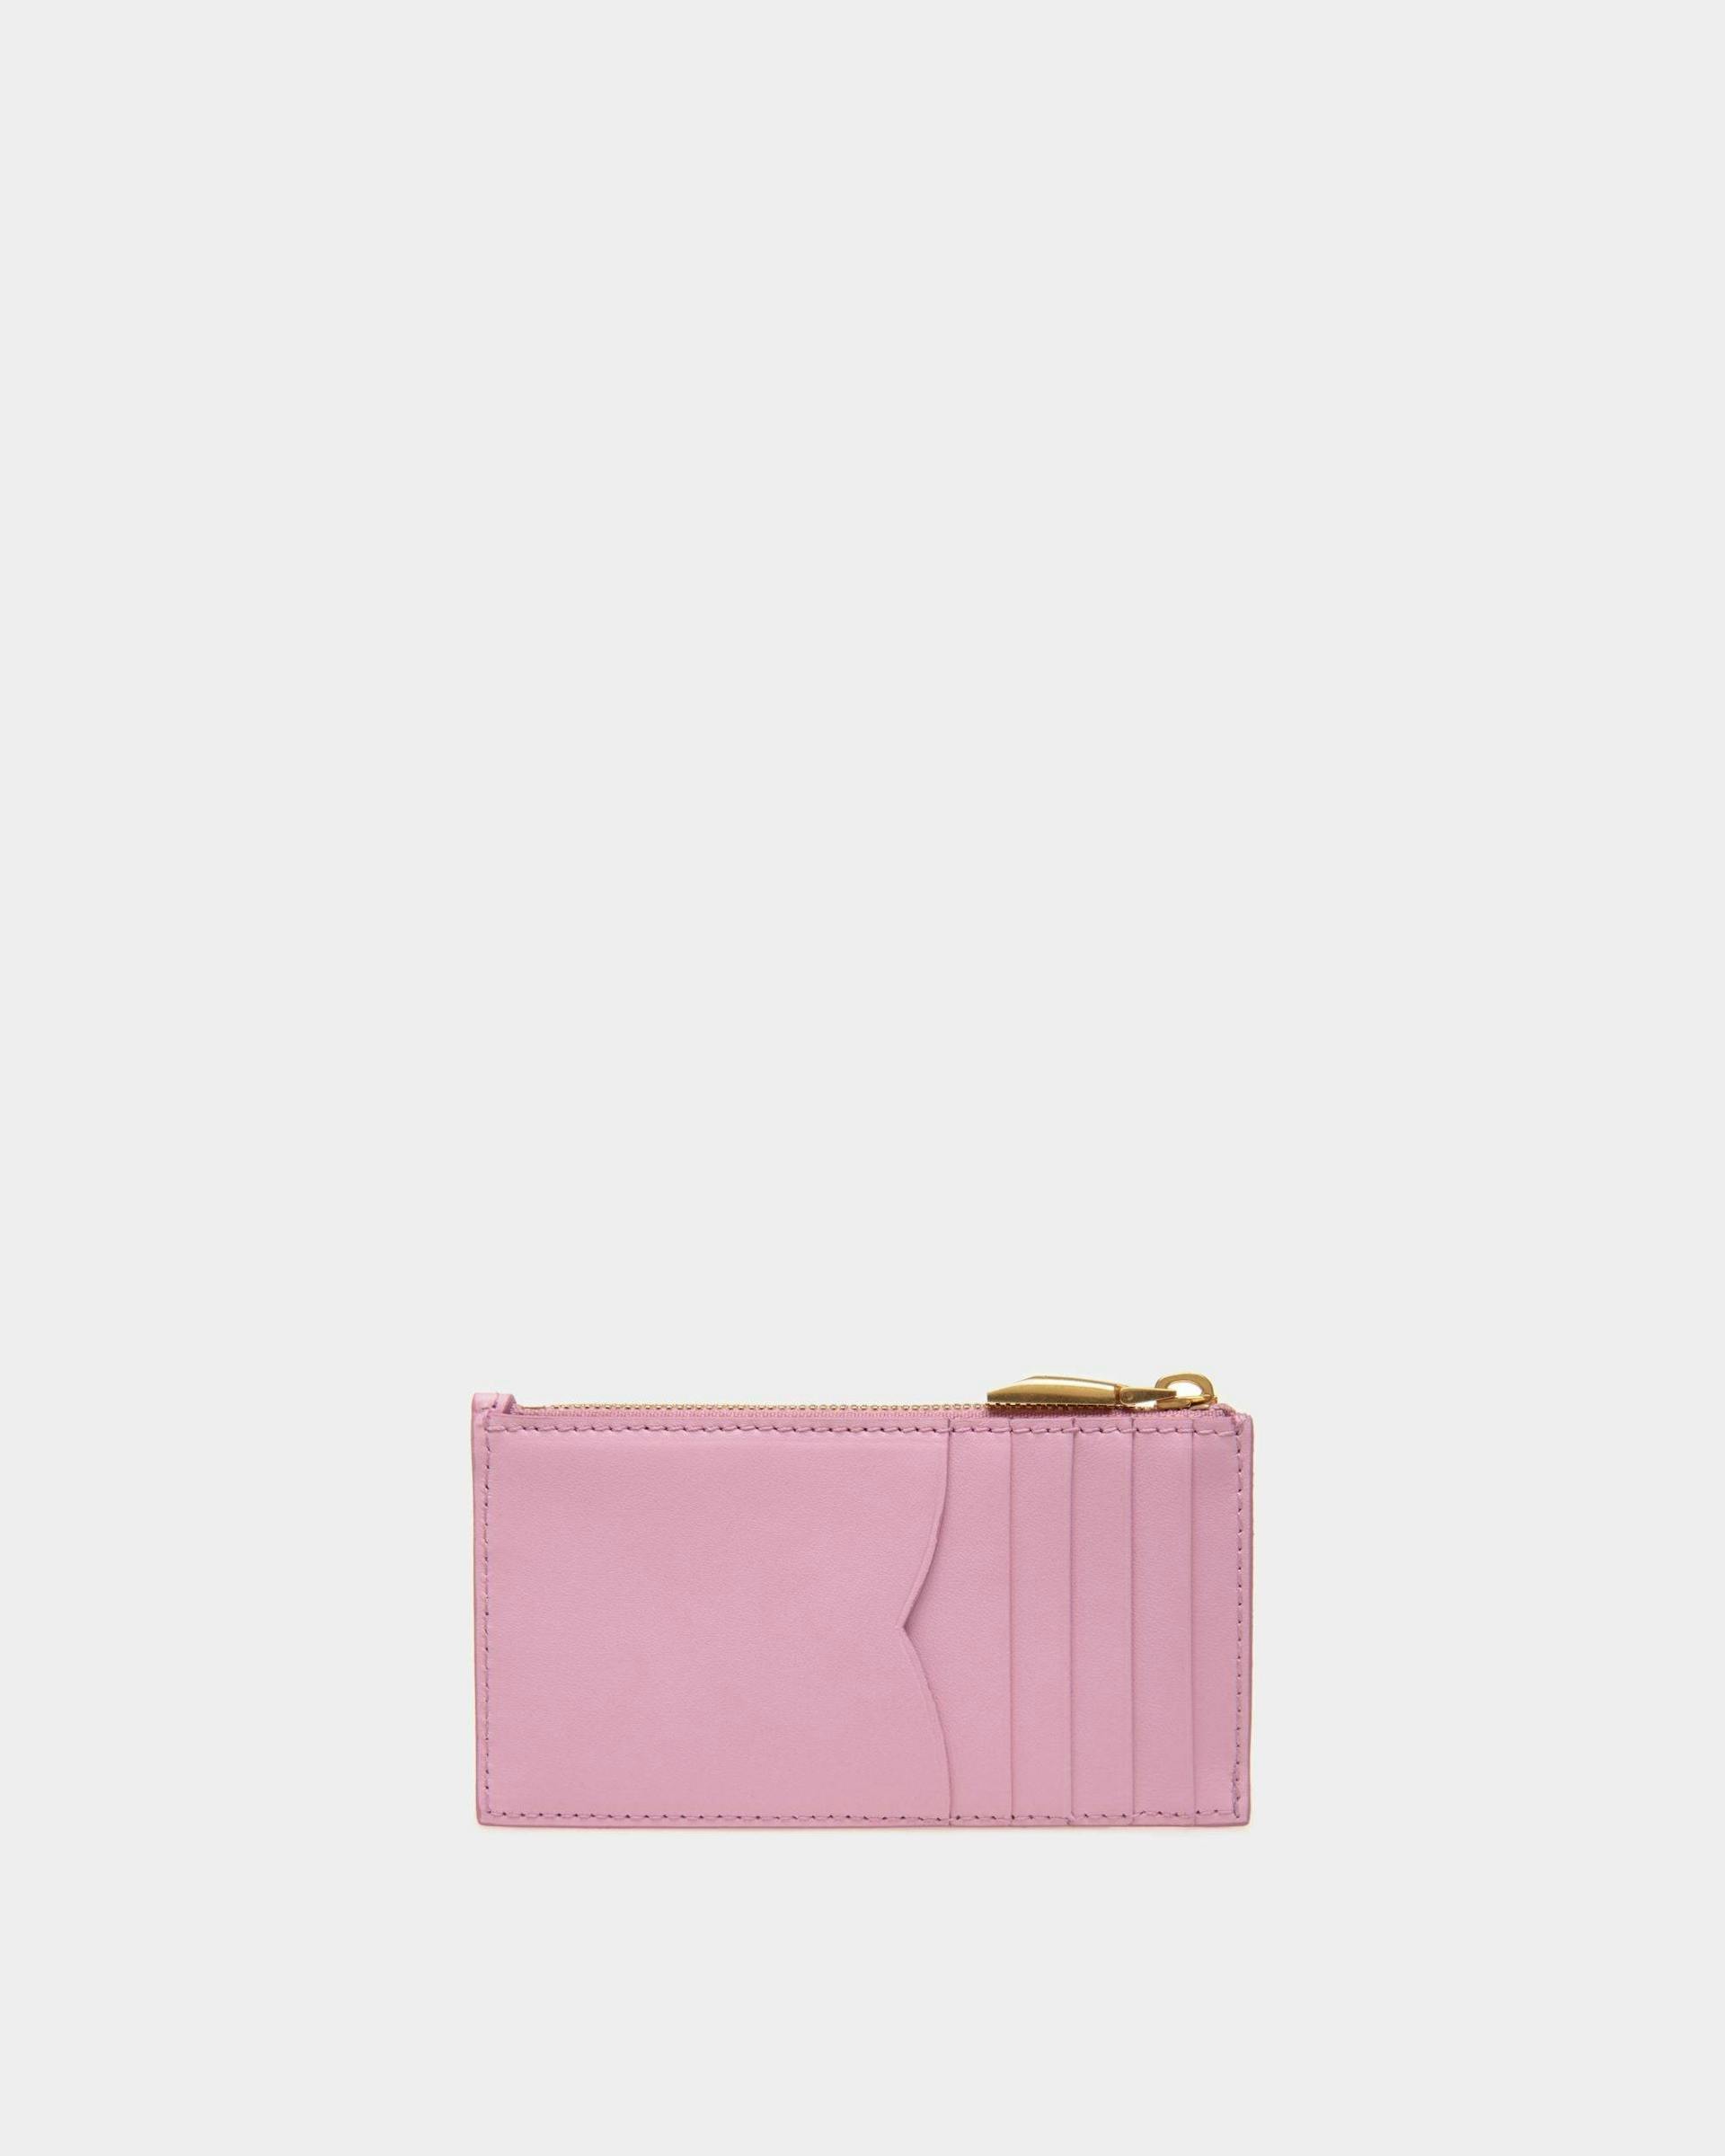 Women's Emblem Zipped Card Holder in Pink Leather | Bally | Still Life Back